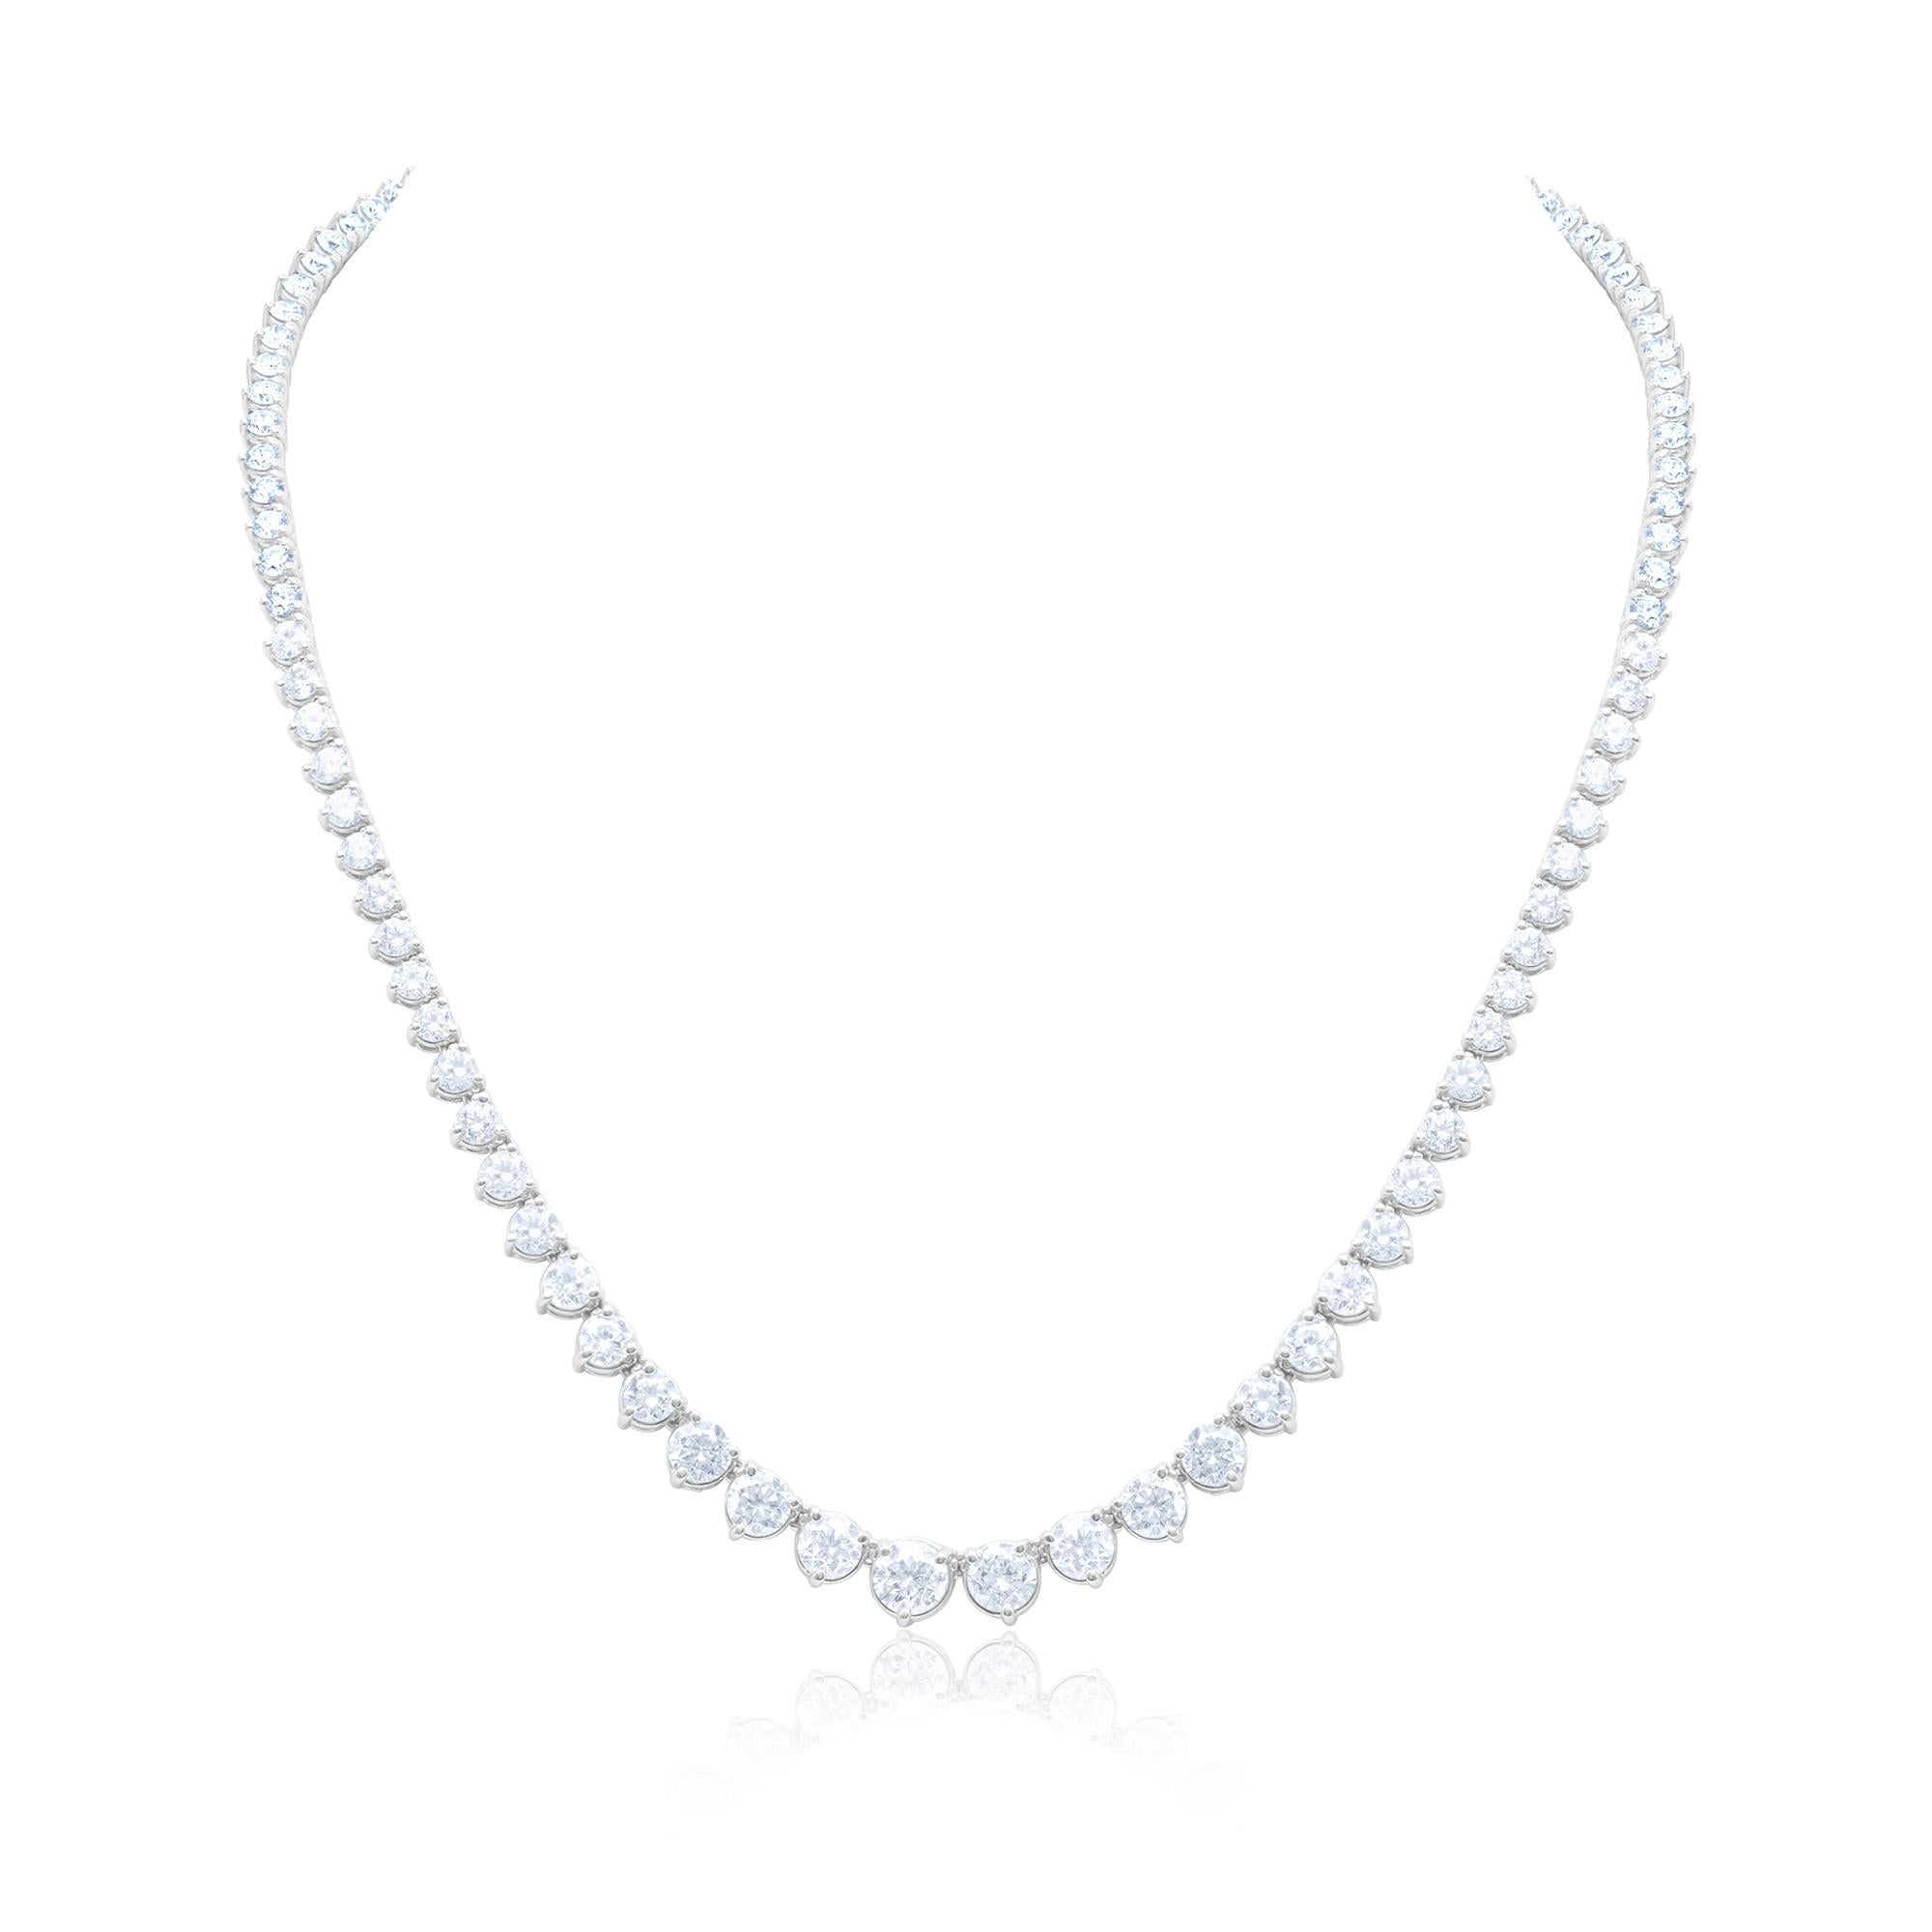 Custom 18k white gold graduated tennis necklace  23.10 cts of round brilliant diamonds 89 stones 0.26 each set in a 3 prong setting FG color SI clarity. Excellent  cut. 